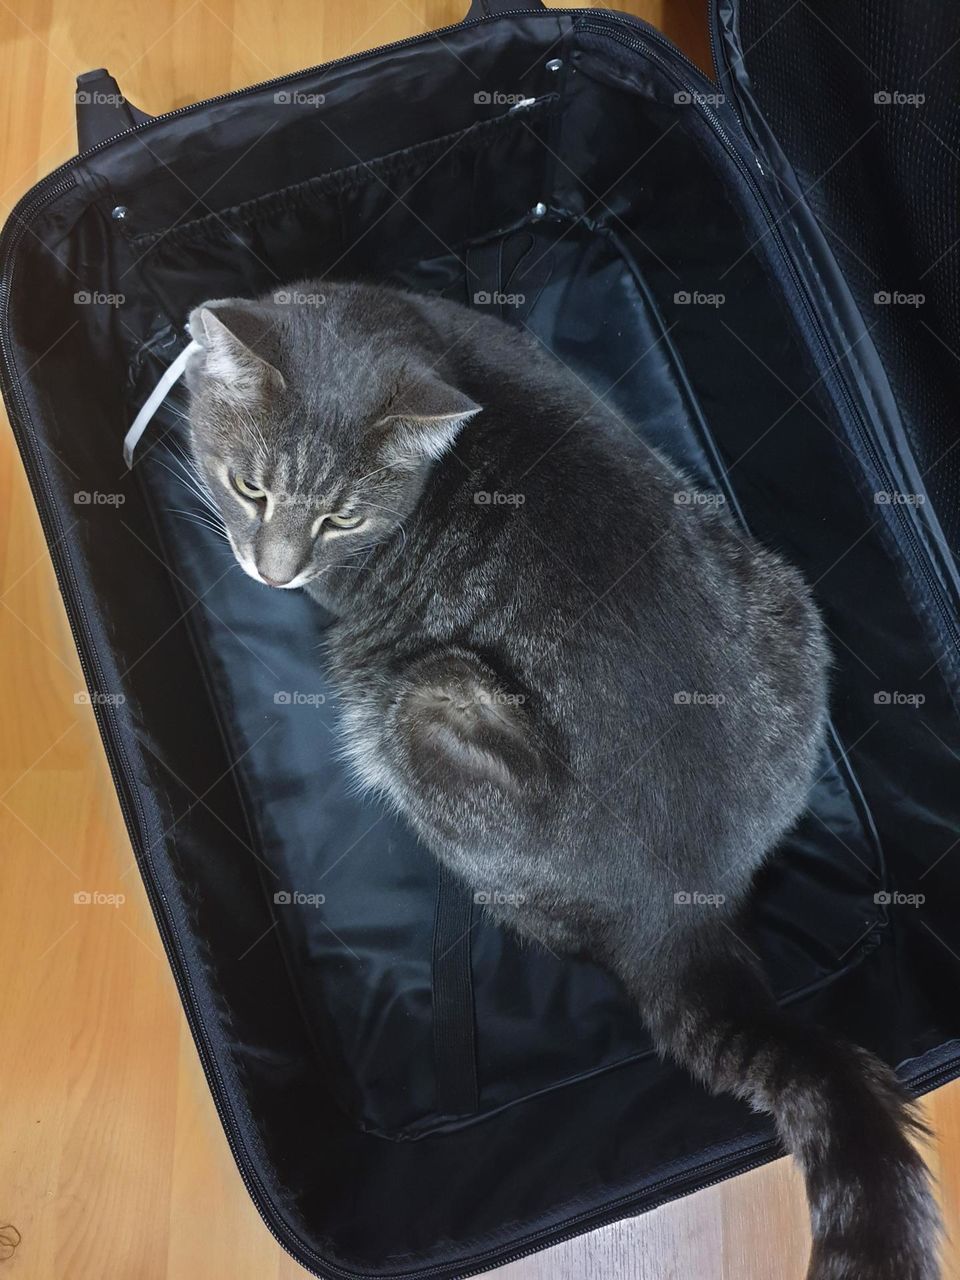 Grey cat sits in a suitcase